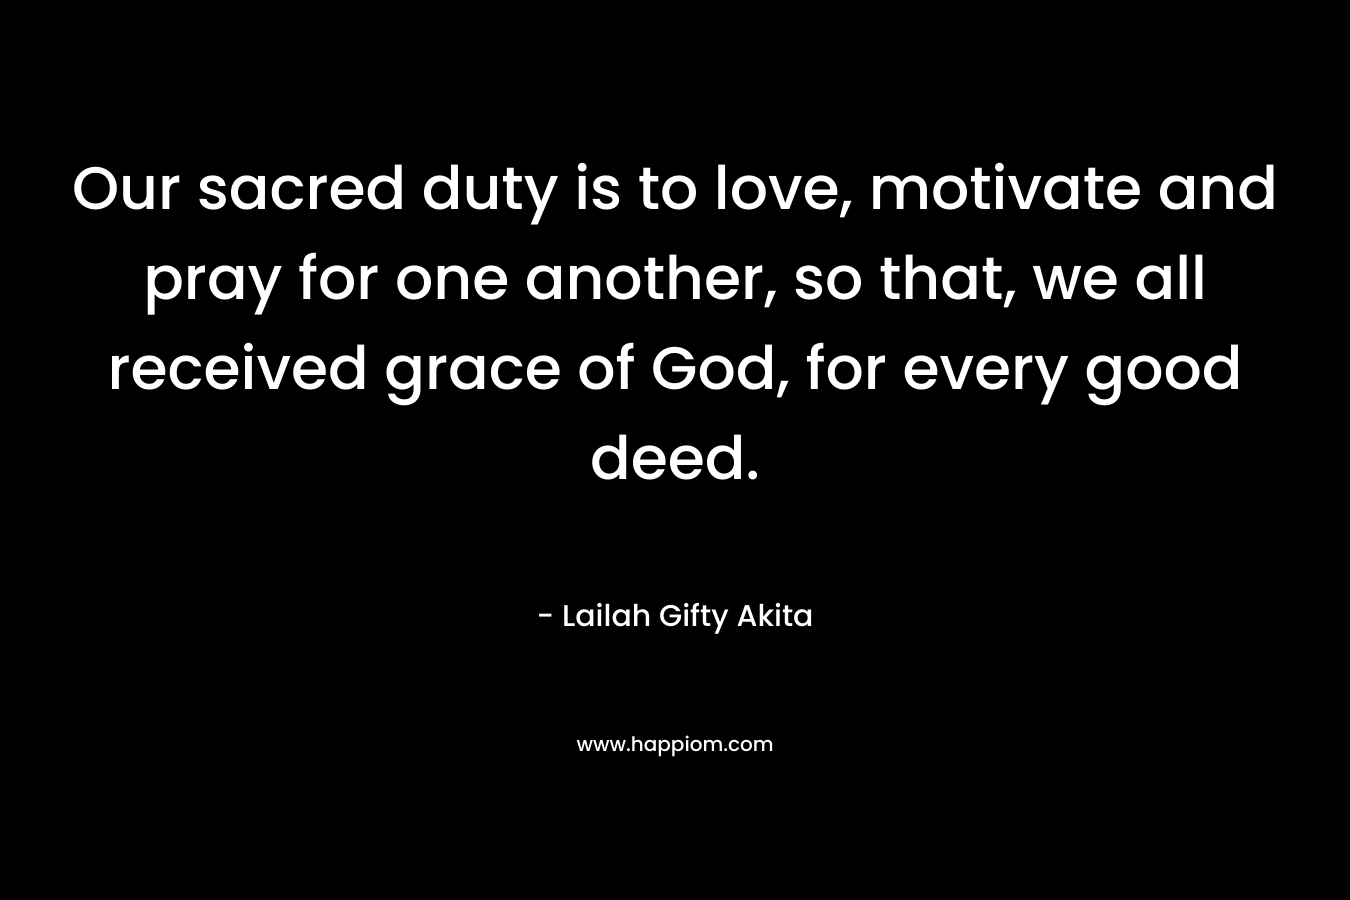 Our sacred duty is to love, motivate and pray for one another, so that, we all received grace of God, for every good deed.